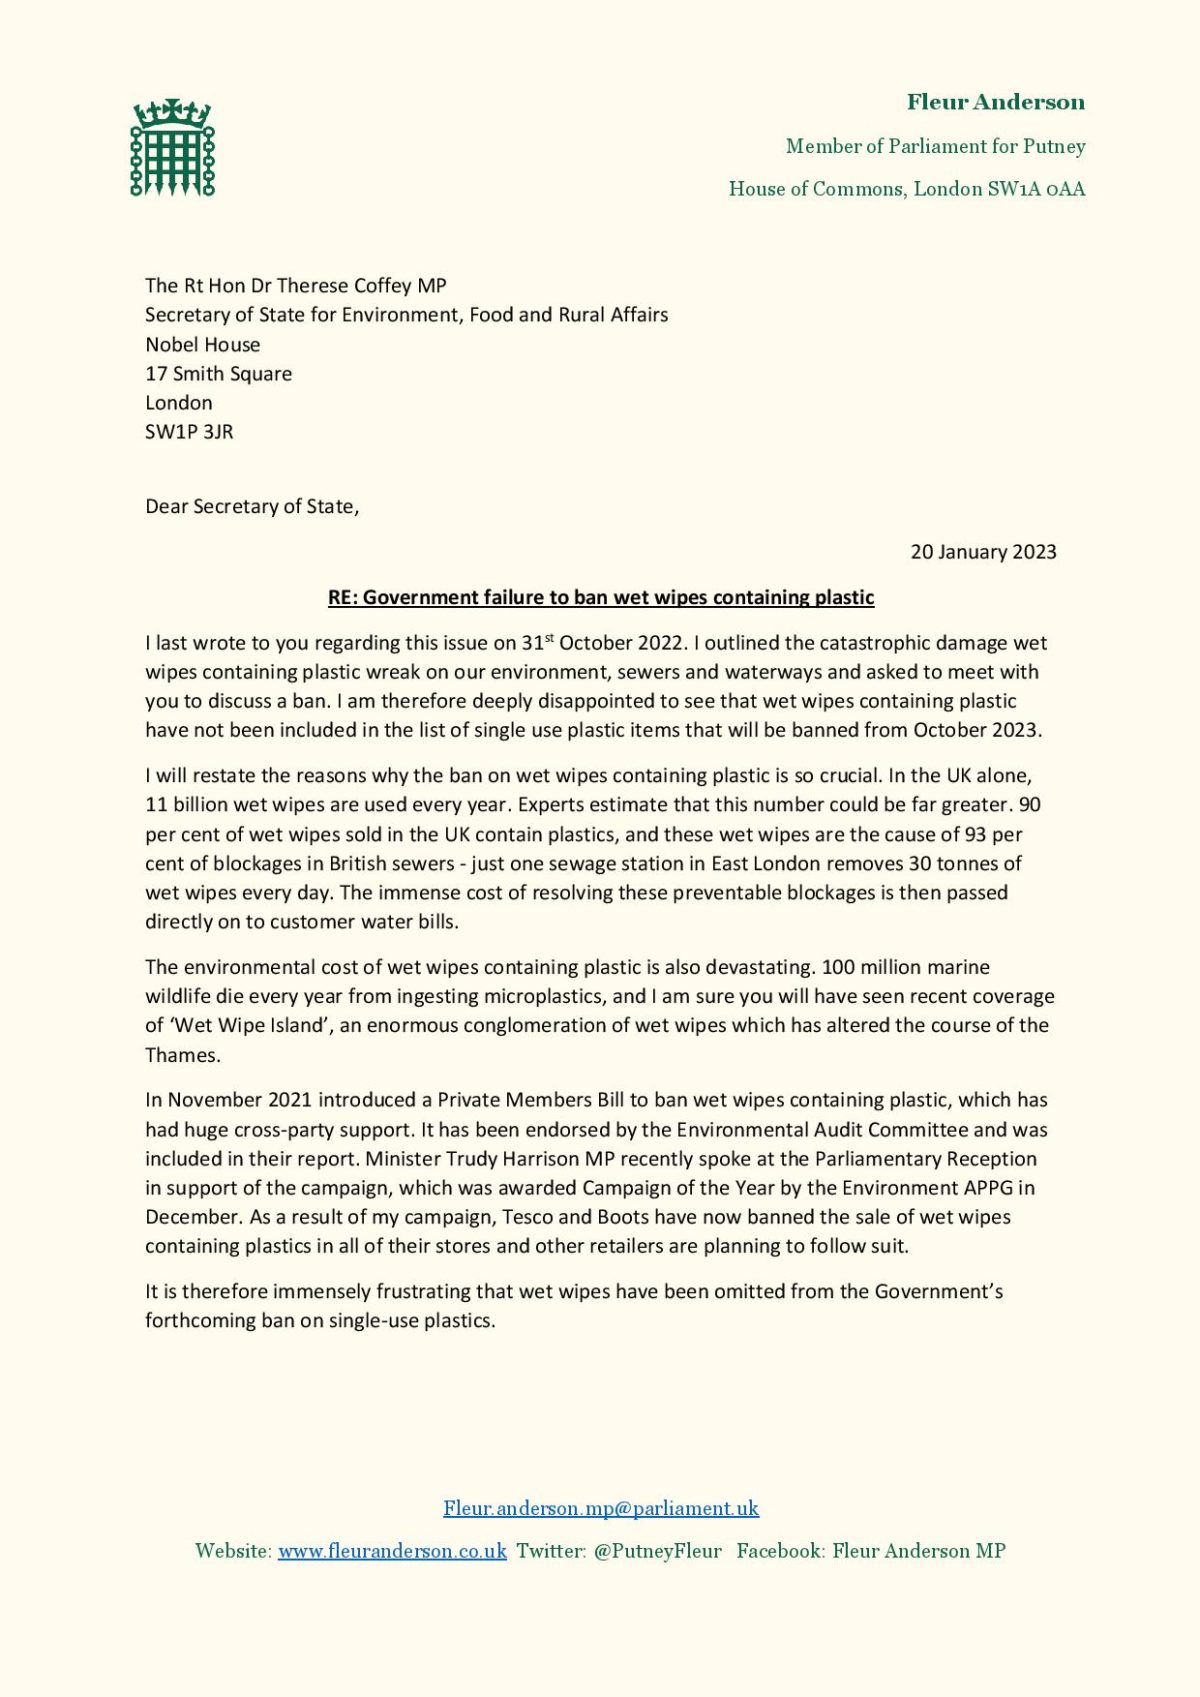 Letter to Therese Coffey MP regarding banning plastic in wet wipes. 